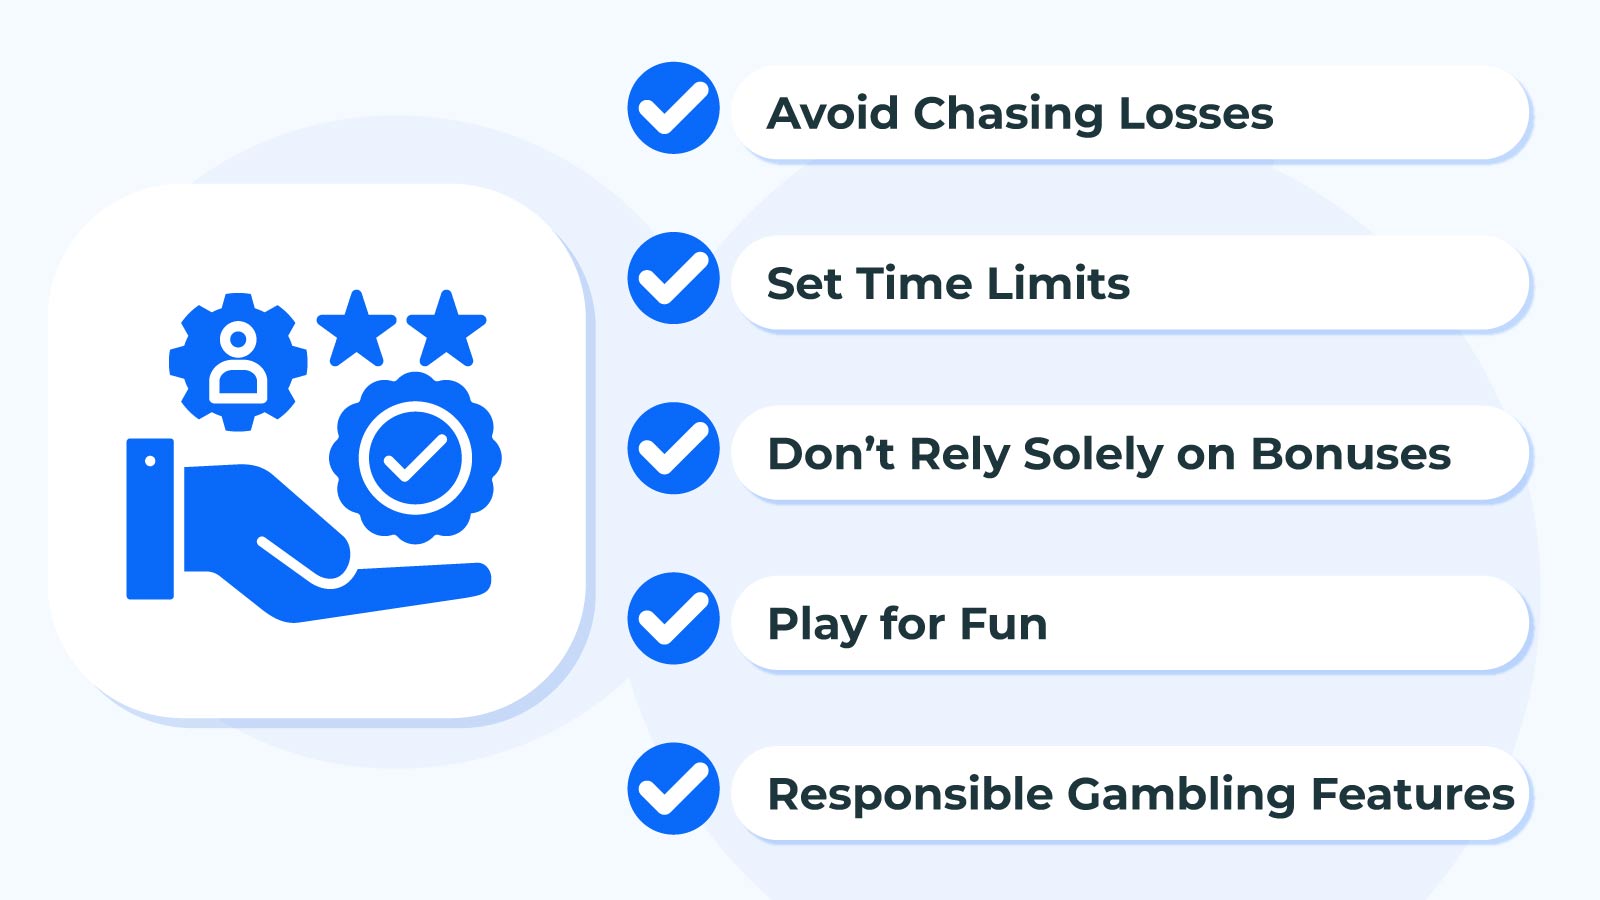 How to Play Responsibly with Casino Promotions